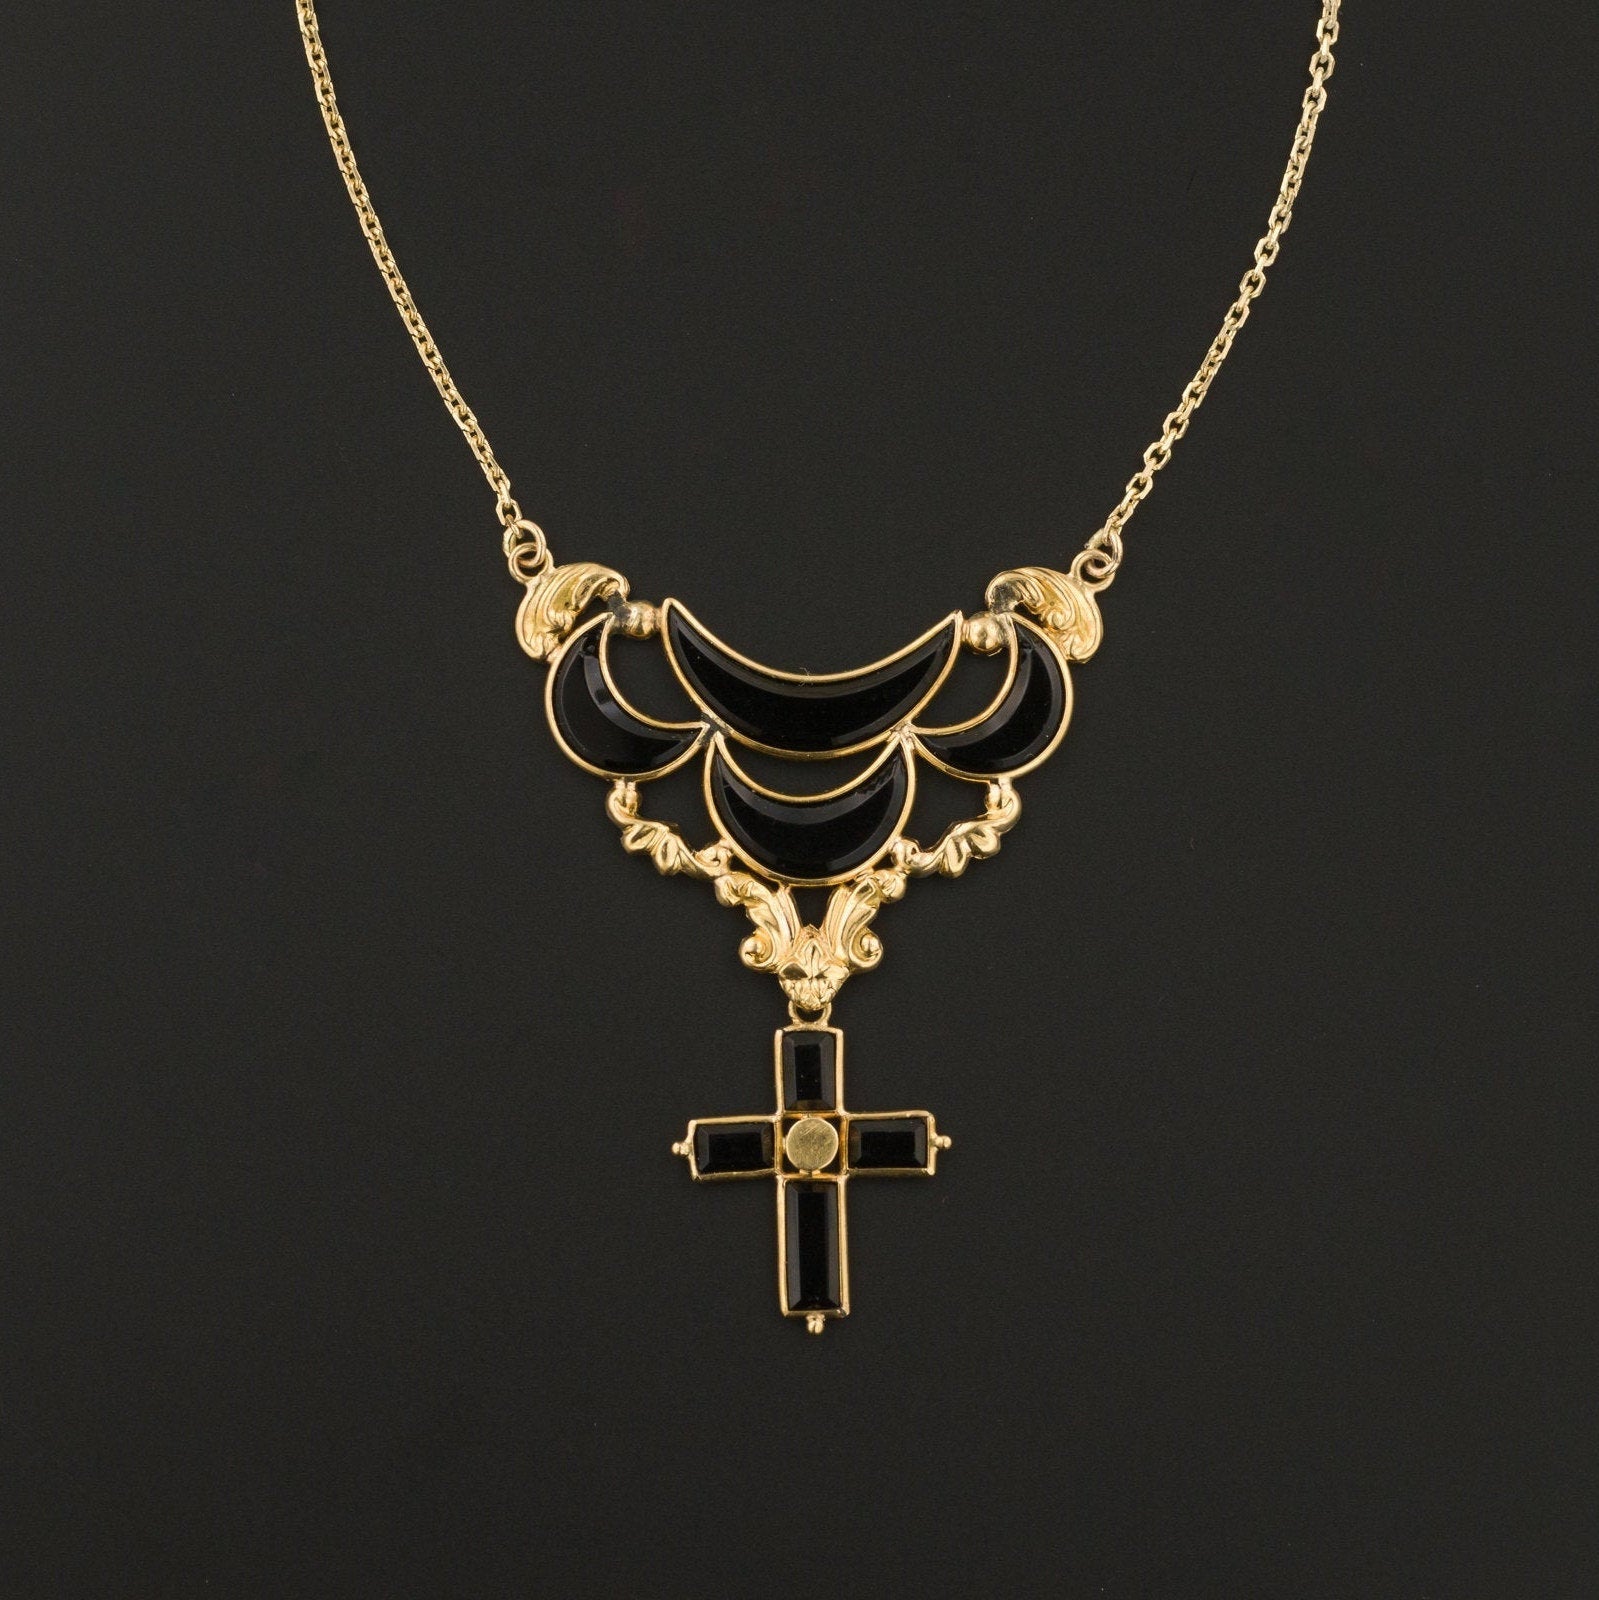 Antique Onyx Cross Necklace | 10k Gold Onyx Drop on 14k Gold Chain | Antique Cross | Religious Gift